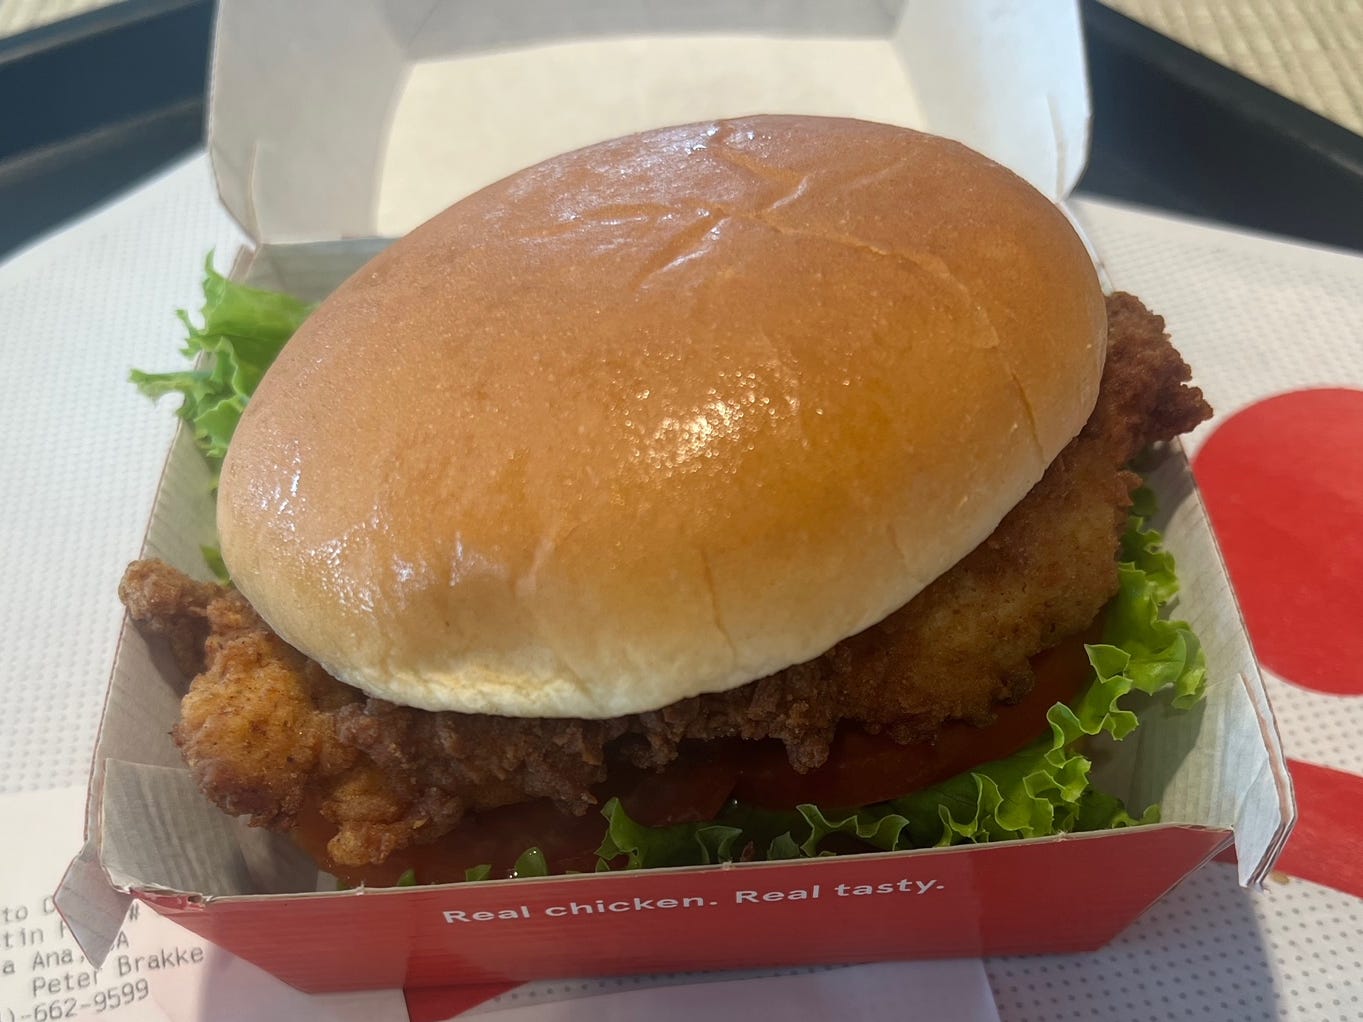 <p>Chick-fil-A's franchise fee for a new restaurant is $10,000 – one of the lowest of any major fast-food brand.</p><p>In 2022, most locations averaged nearly $8.7 million in sales per year. That's more than double the revenue made in a year by the average McDonald's. And, remember, Chick-fil-A isn't open on Sundays.</p><p><em>Source: <a href="https://www.restaurantbusinessonline.com/top-500-chains-2023/chick-fil" rel="noopener">Restaurant Business</a> and <a href="https://www.businessinsider.com/what-it-costs-to-open-a-chick-fil-a-2016-1" rel="noopener">Insider</a></em></p>